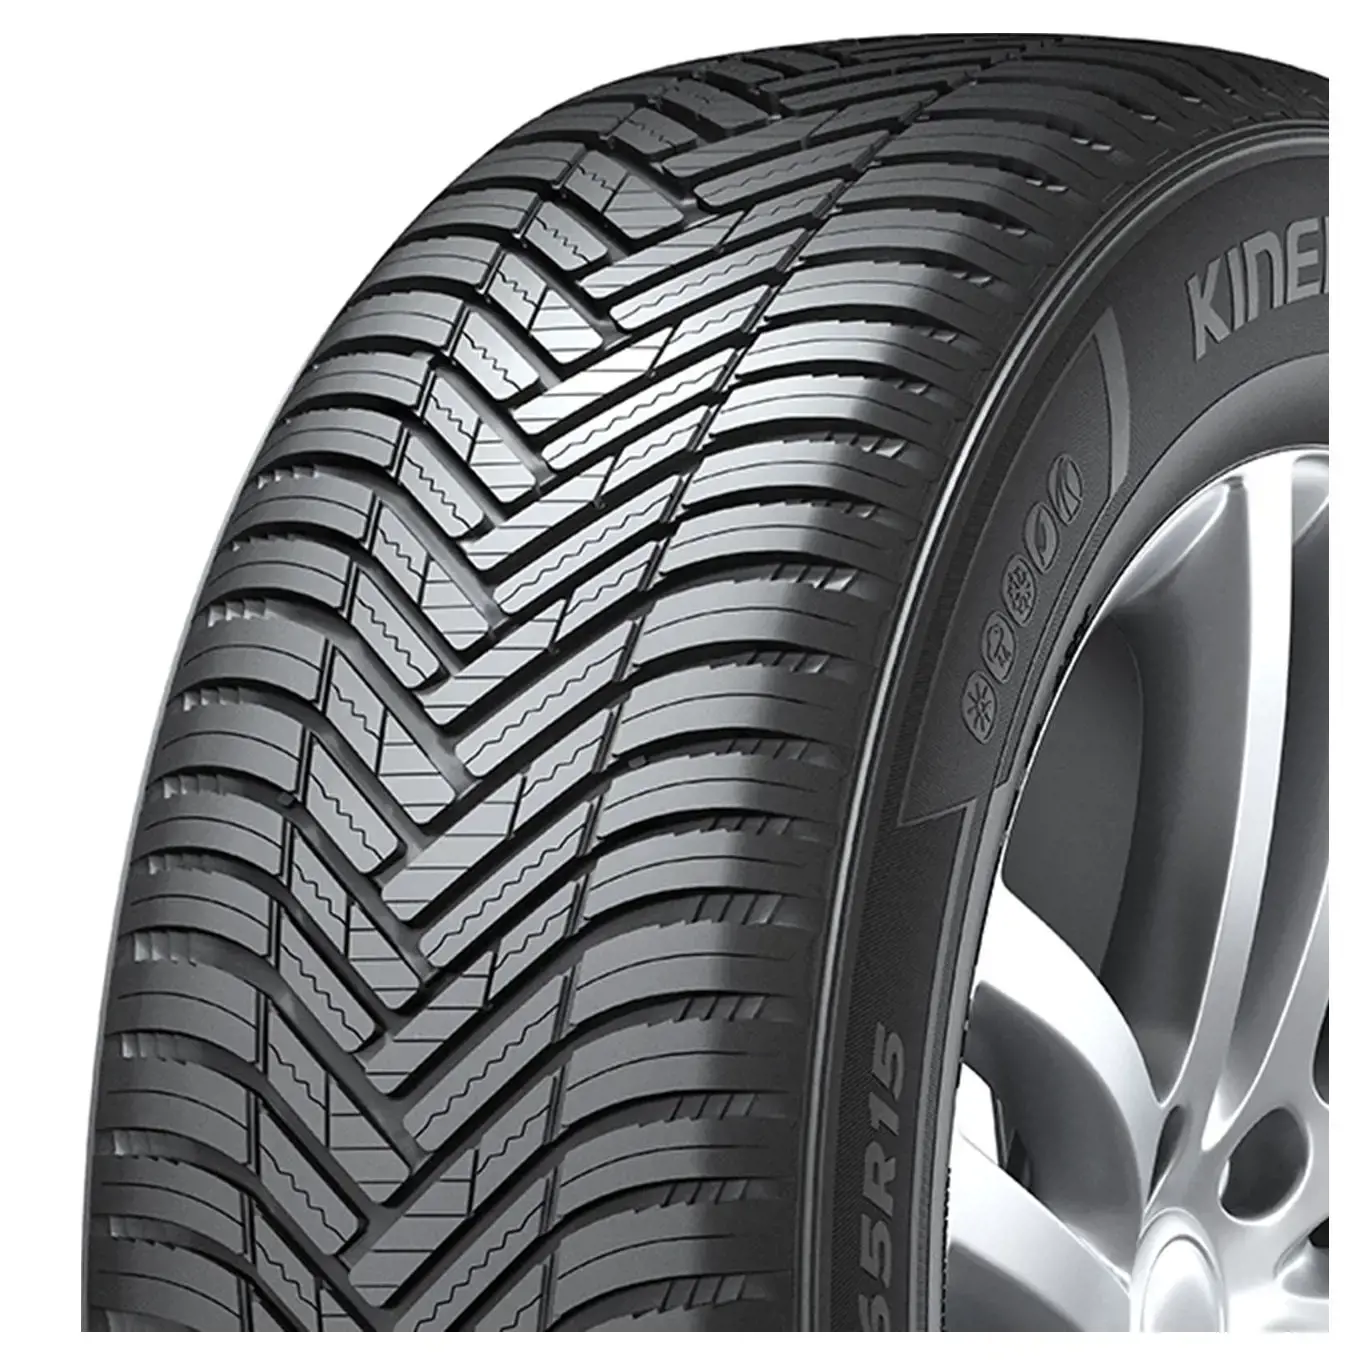 175/55 R15 77T KInERGy 4S 2 H750 M+S